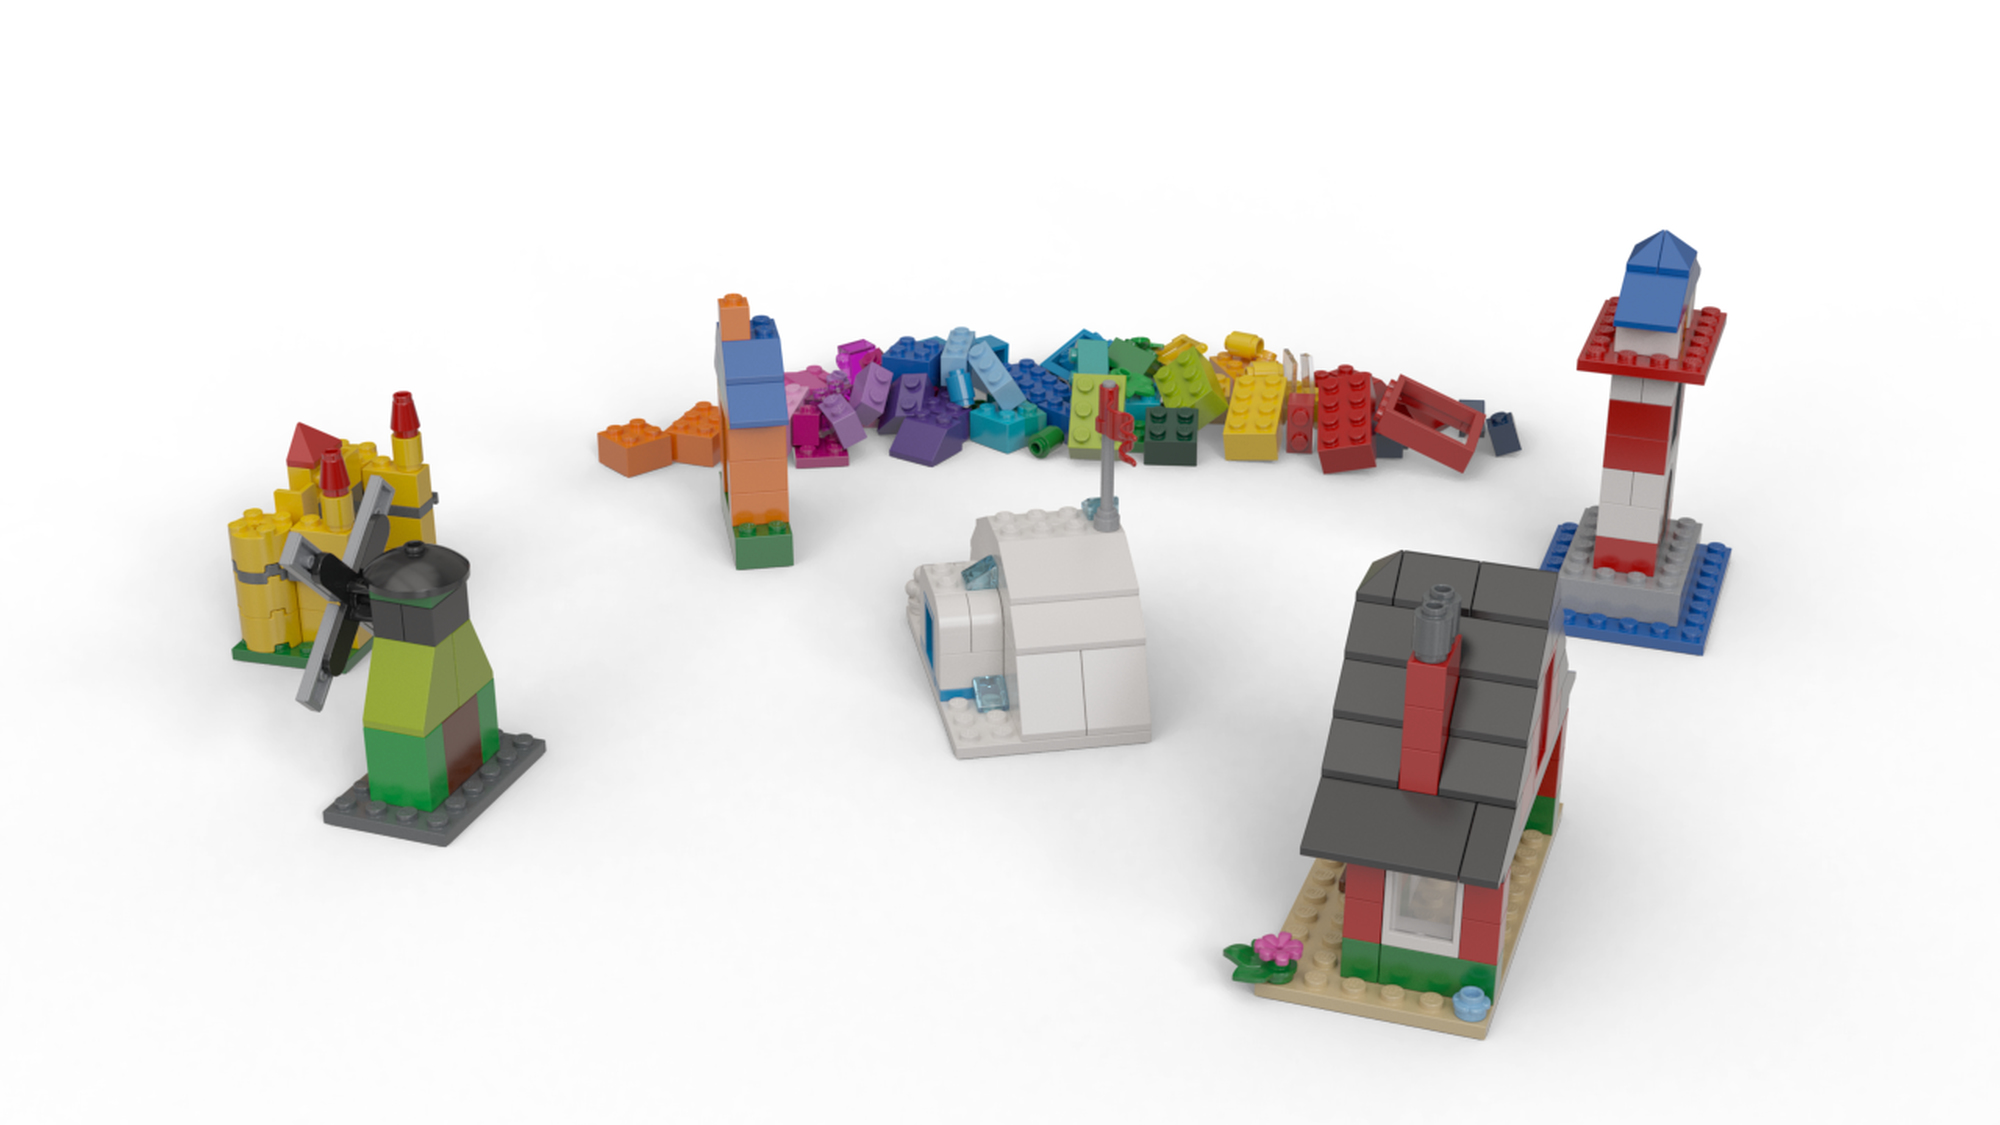 Bricks and Houses 11008 | Classic | Buy online at the Official LEGO® Shop US